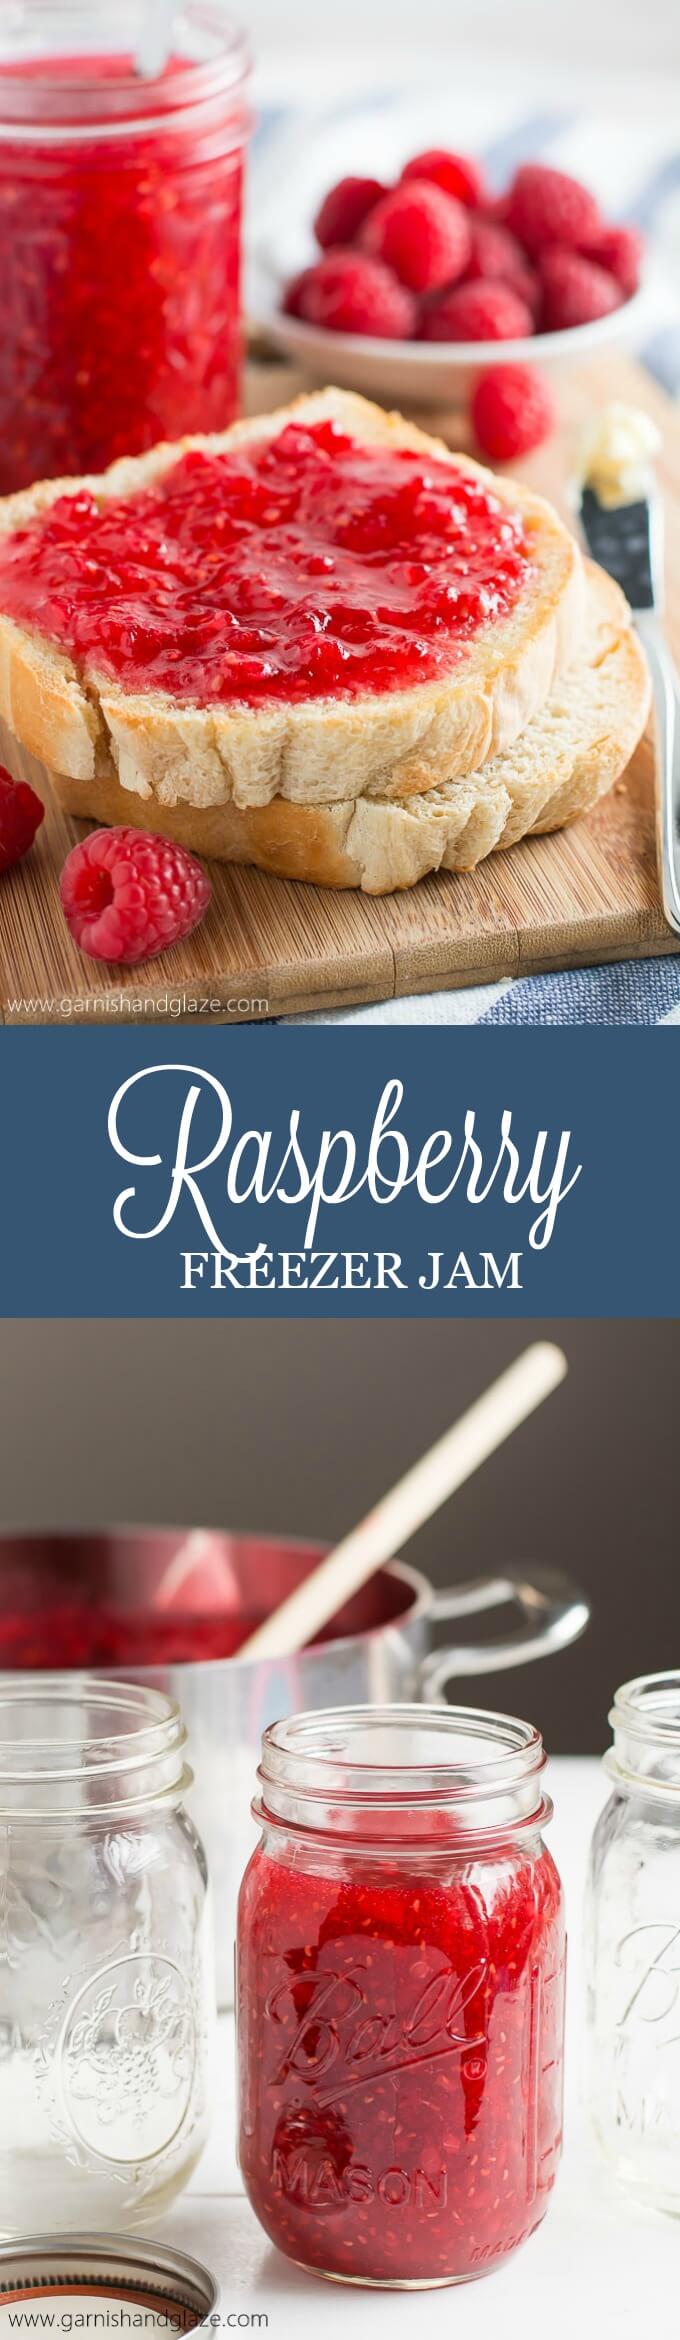 Always have delicious homemade jam on hand with this simple Raspberry Freezer Jam recipe. No special canning equipment needed! 